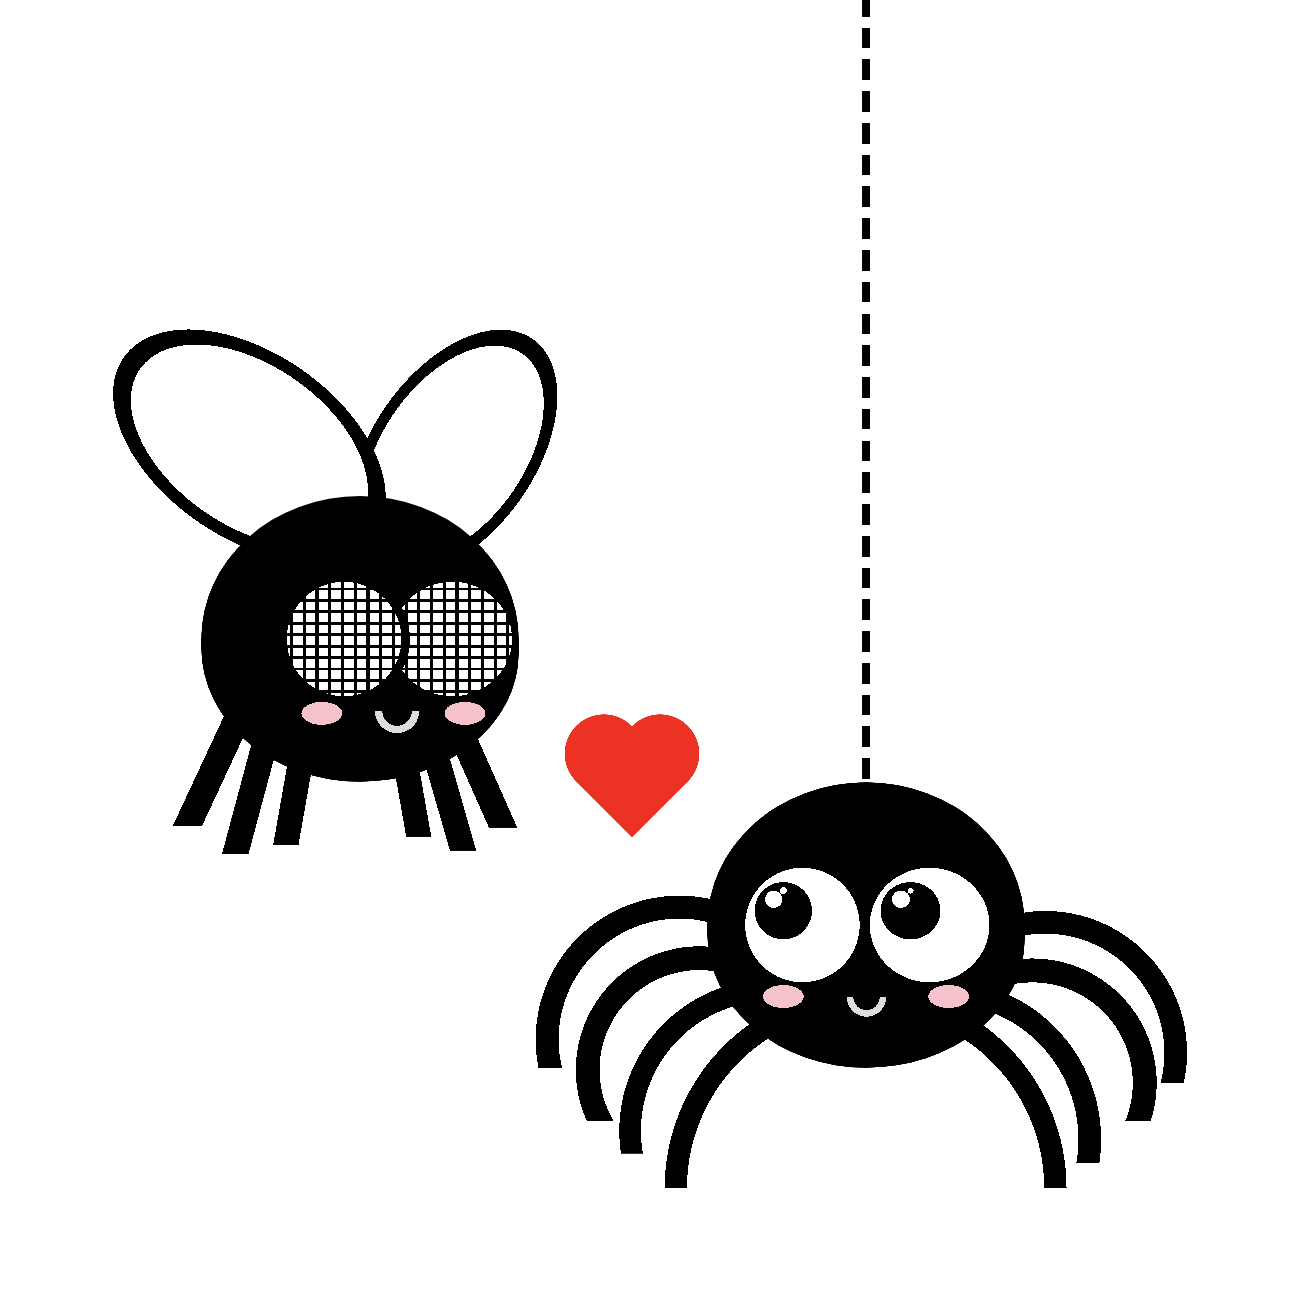 Cartoon of a spider and a fly looking at each other smiling, with a heart between them